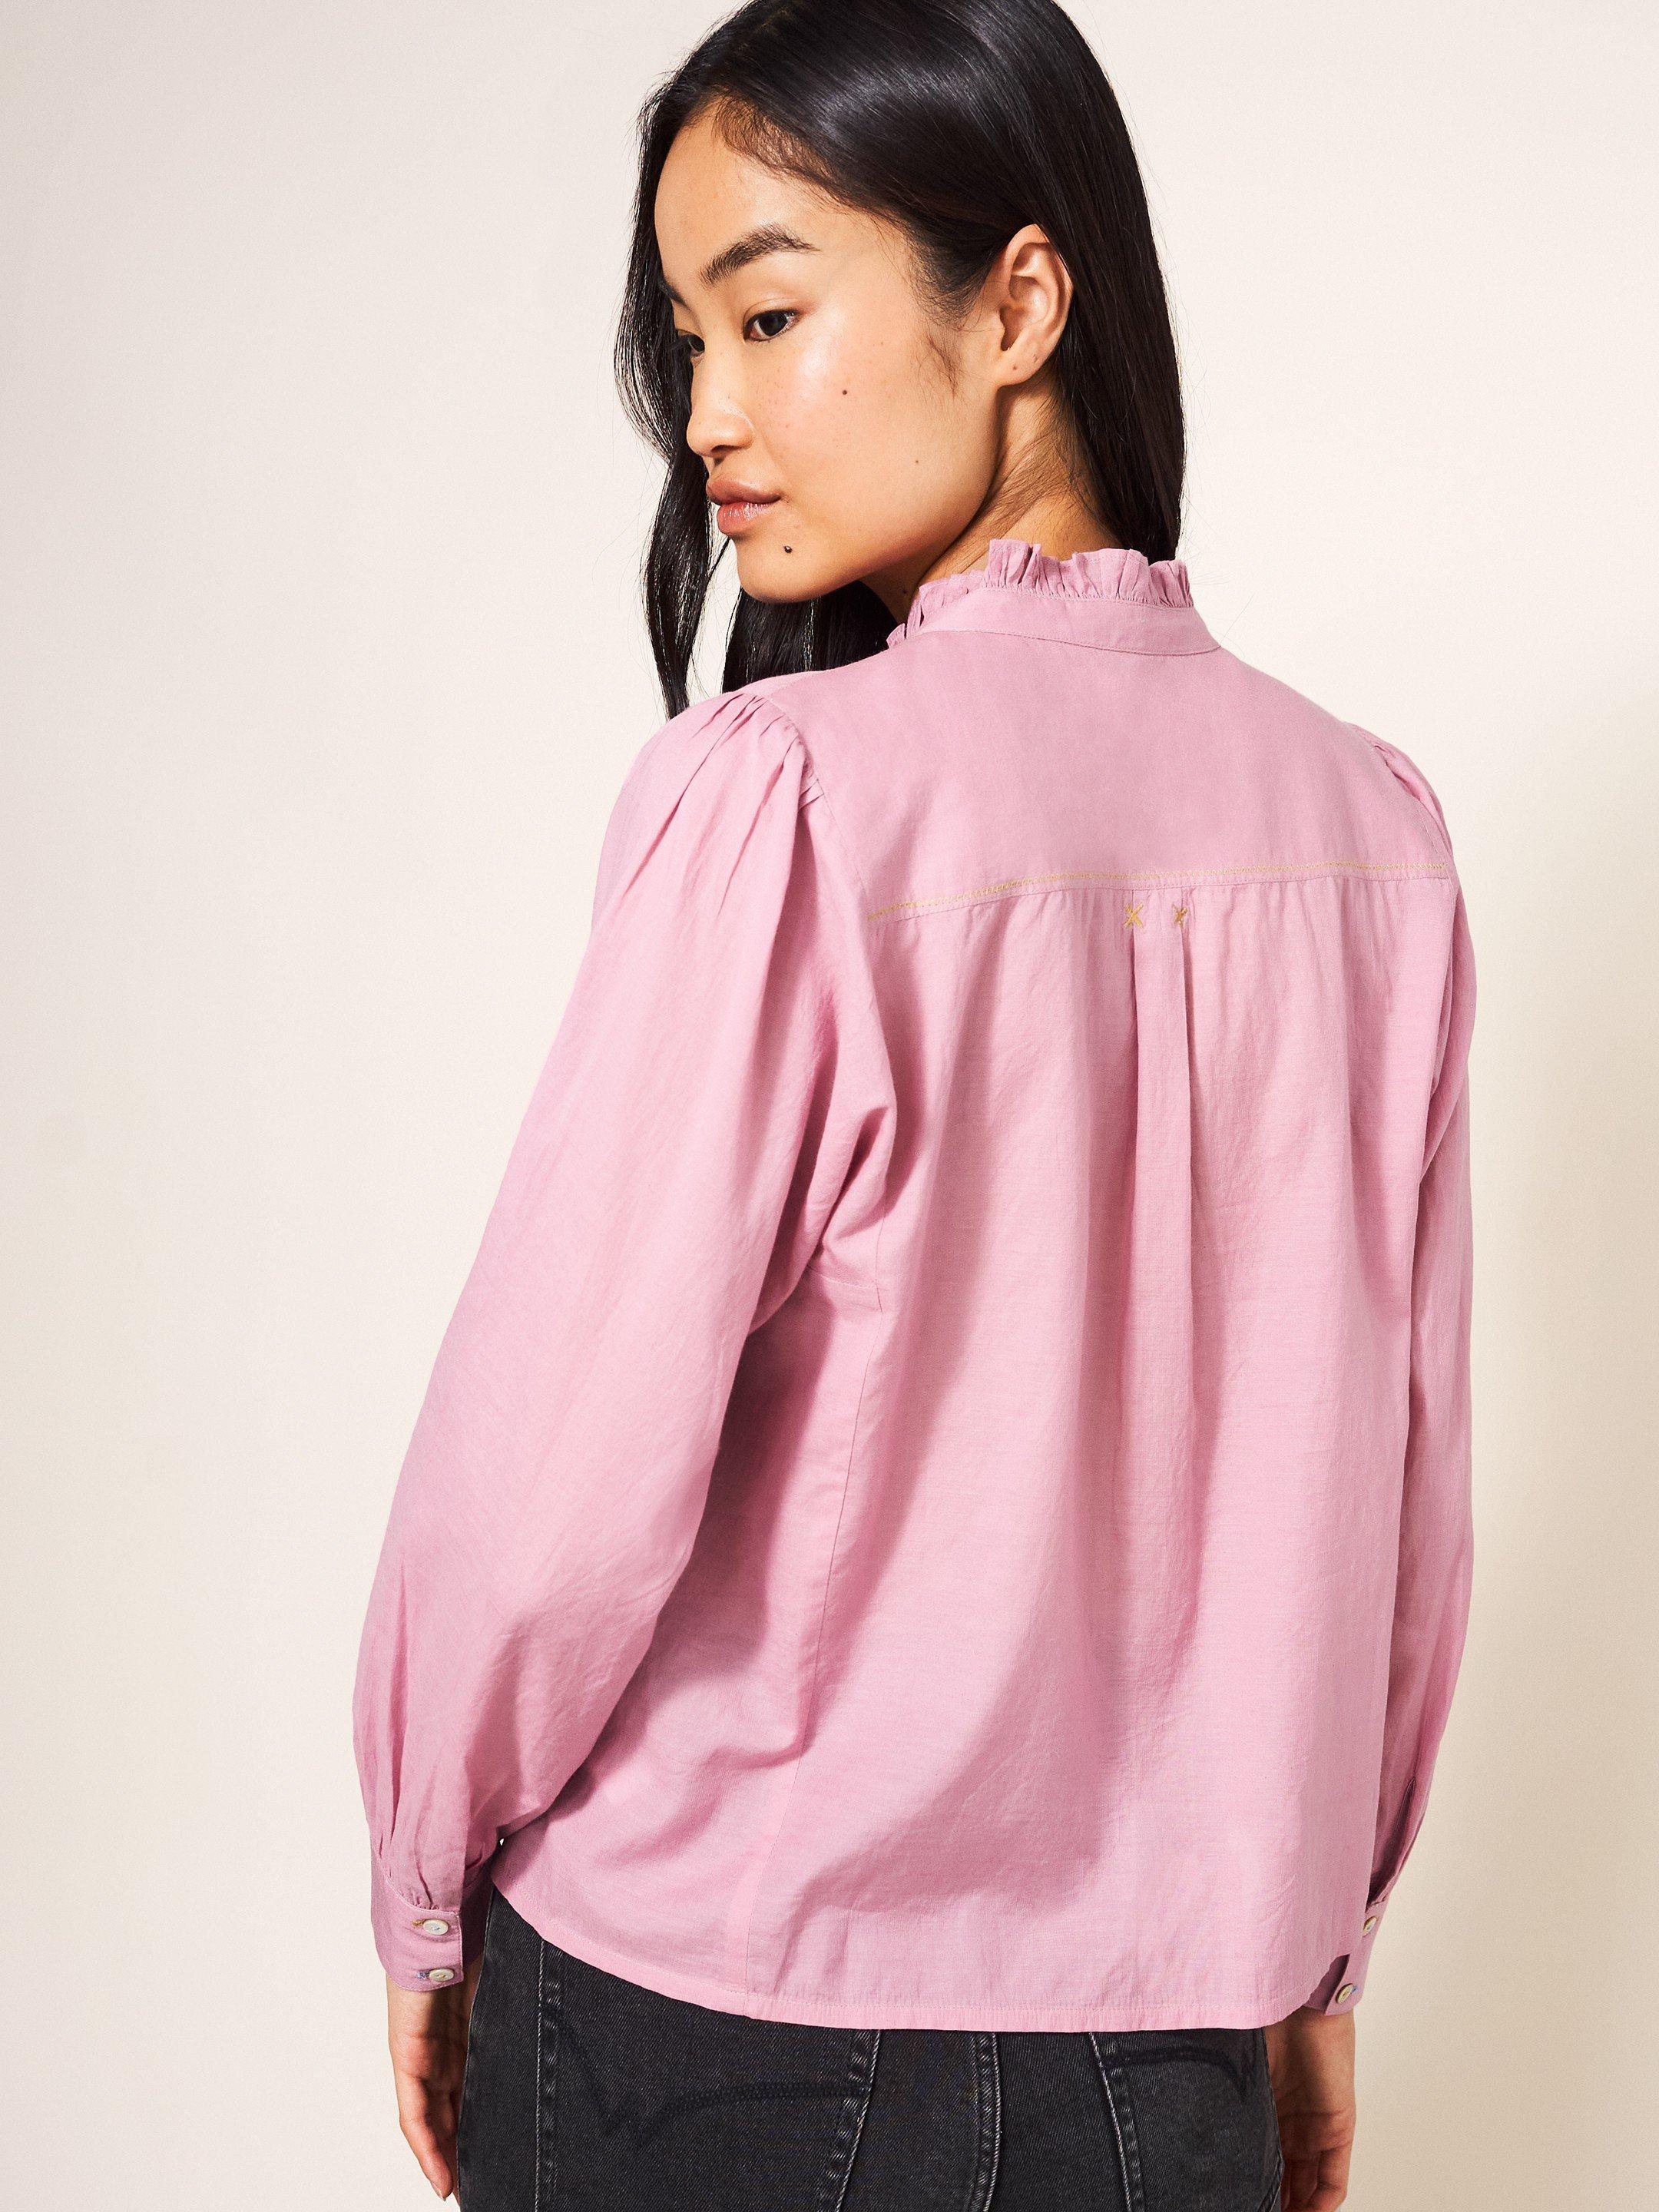 Paige Cotton Blend Shirt in MID PINK - MODEL BACK